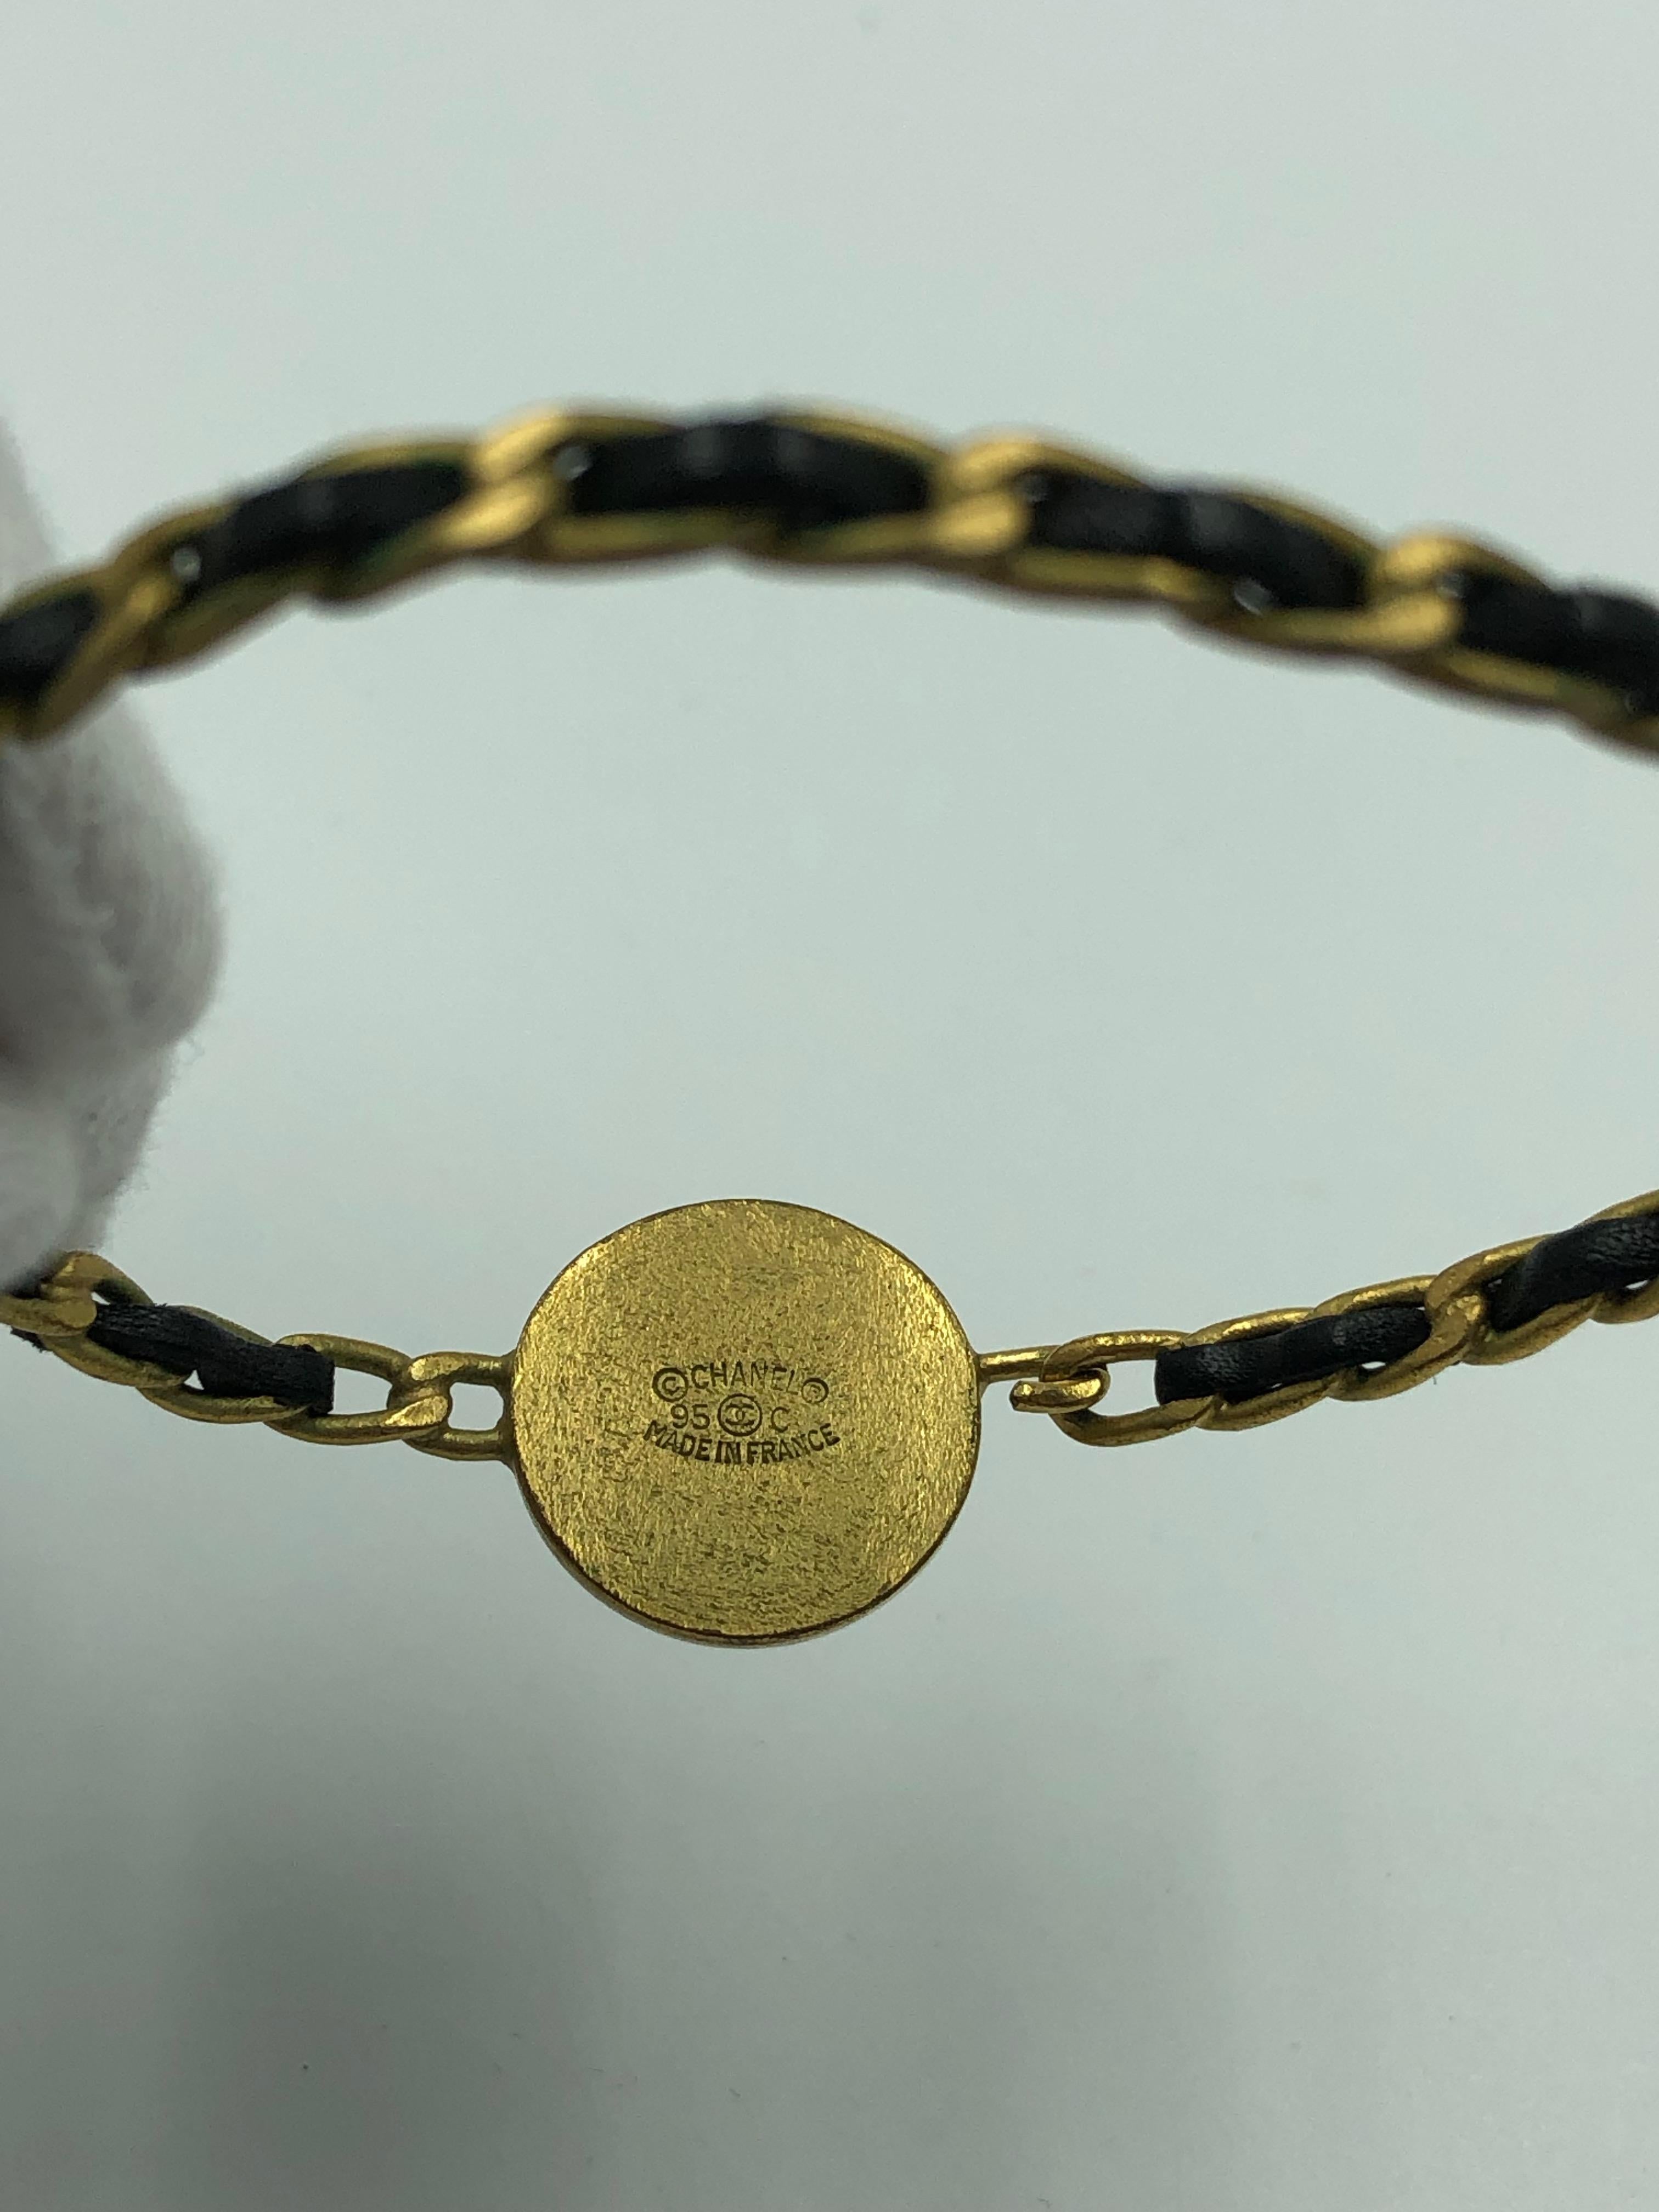 Chanel Rare Vintage Twisted Gold Metal and Leather Bracelet with Chanel Medallion Clasp

*MEASUREMENTS*
Inner circumference: 7